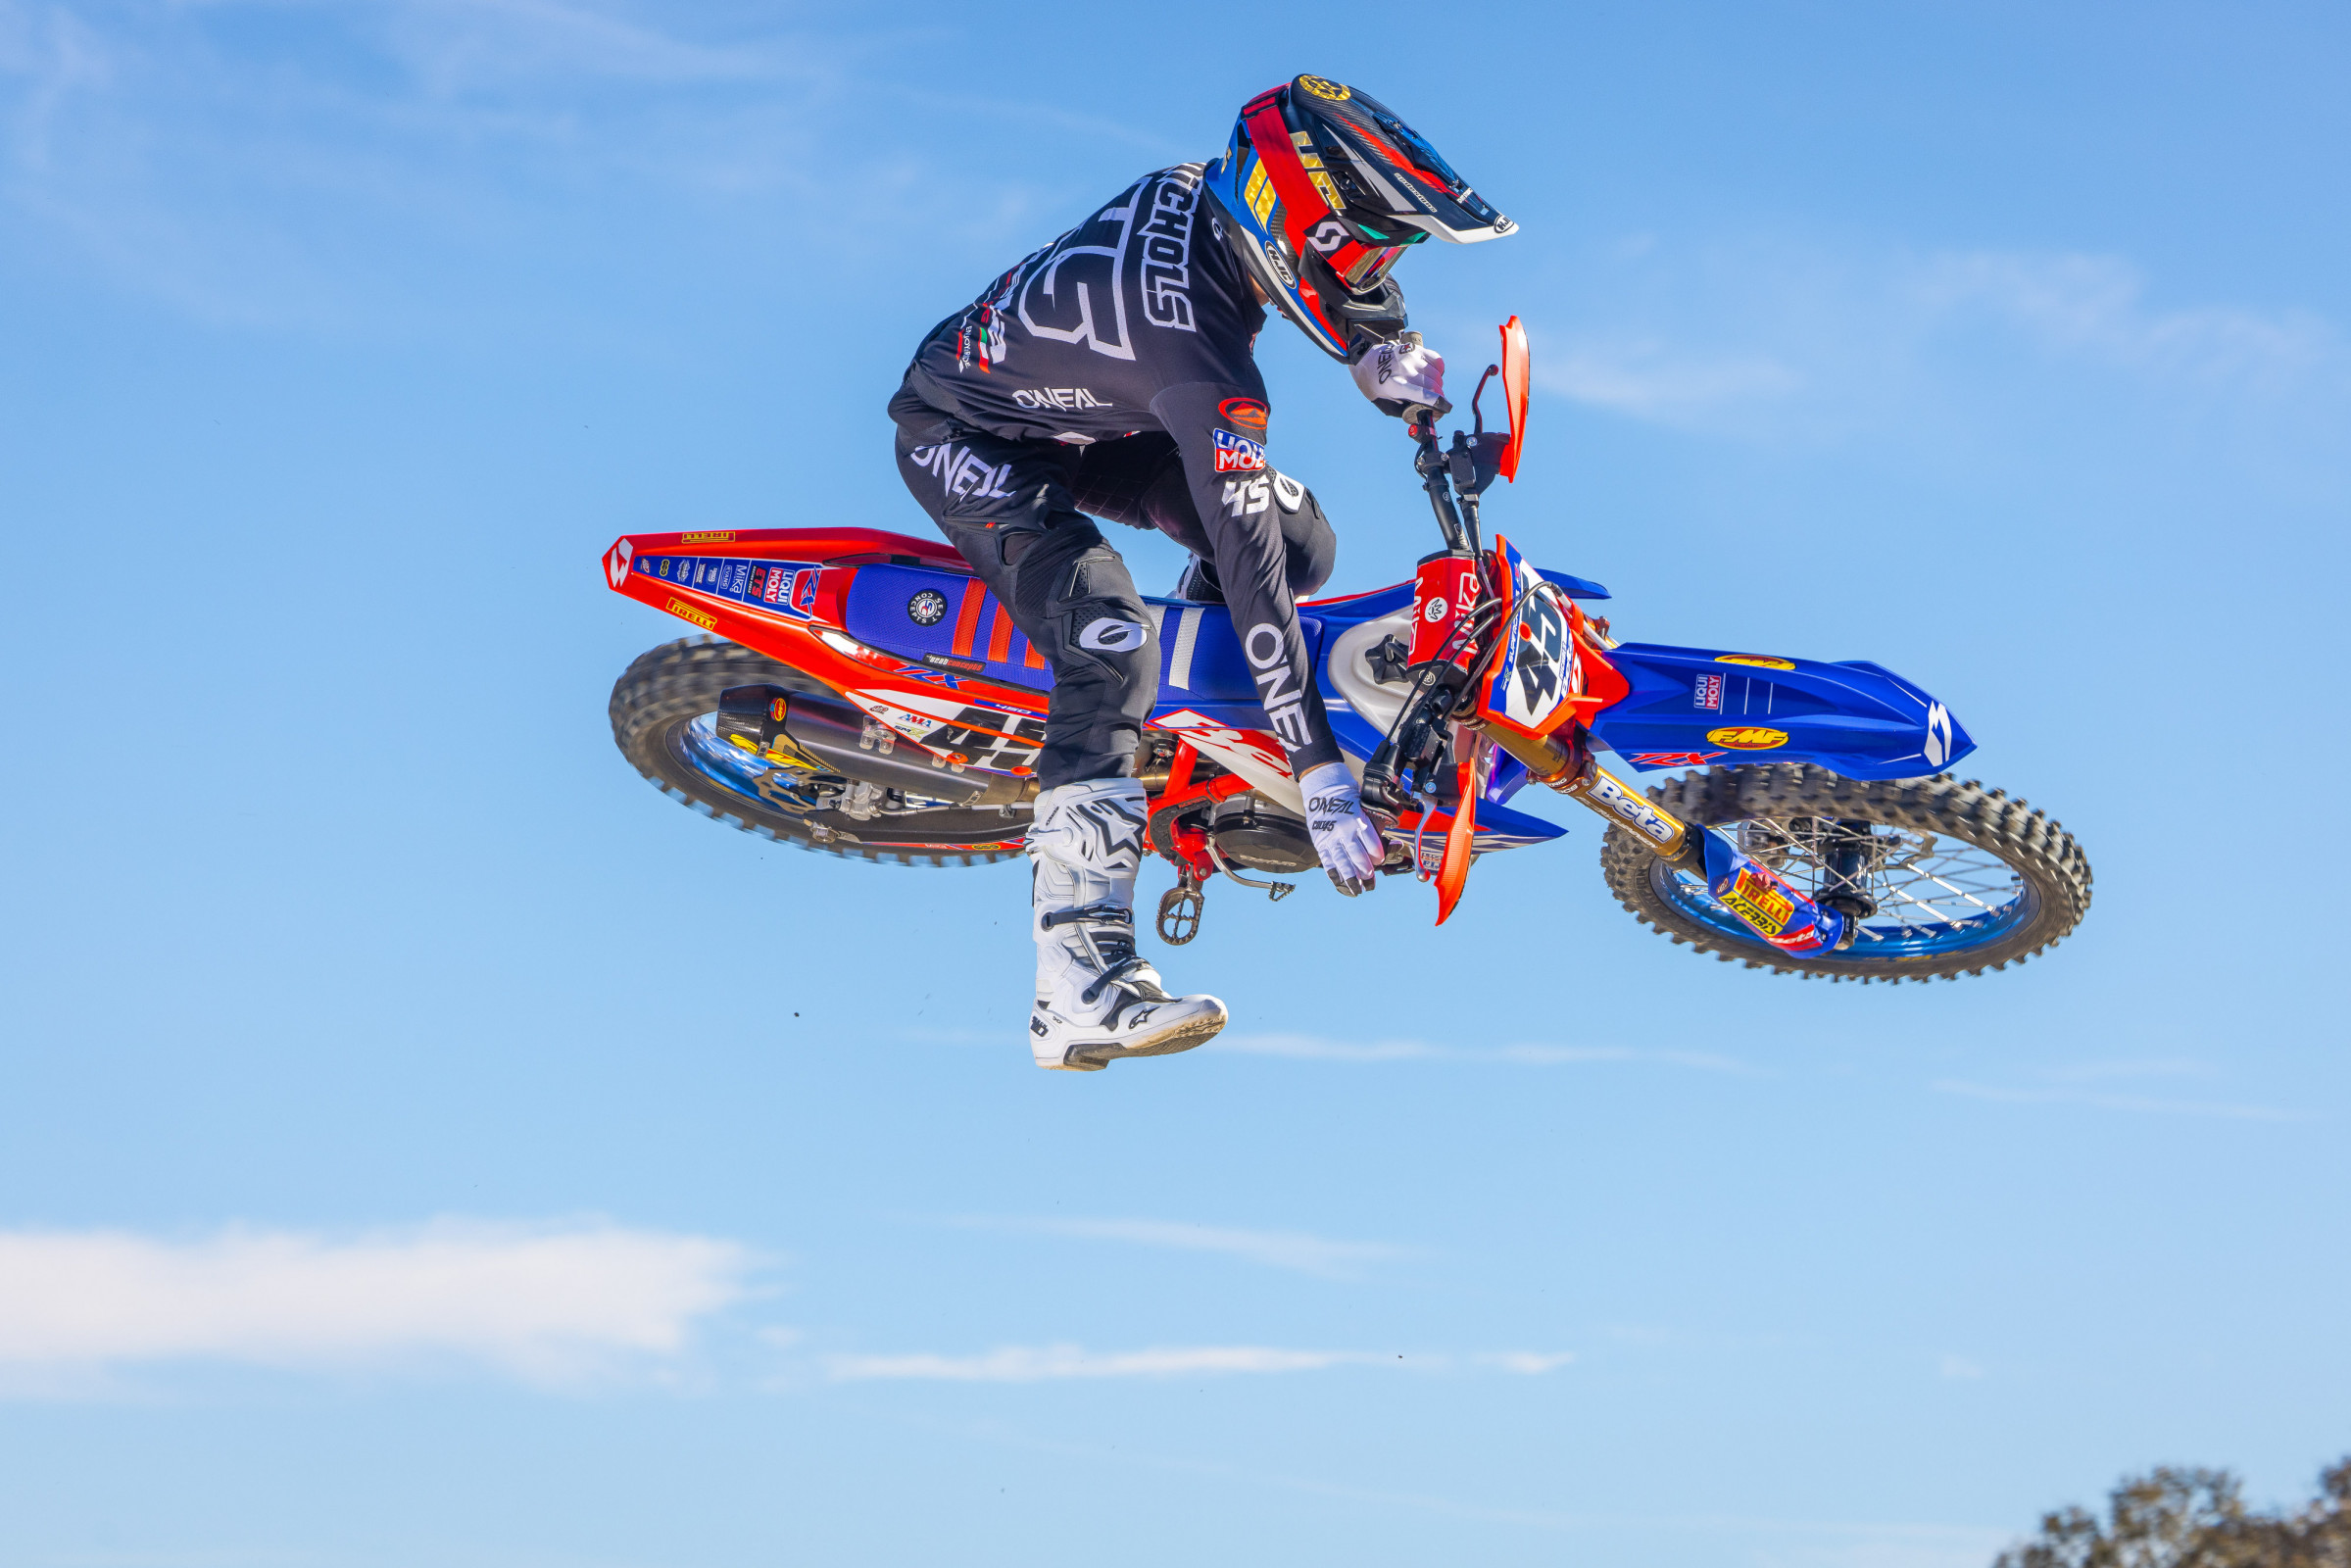 How to become an FMX rider: 10 essential tips